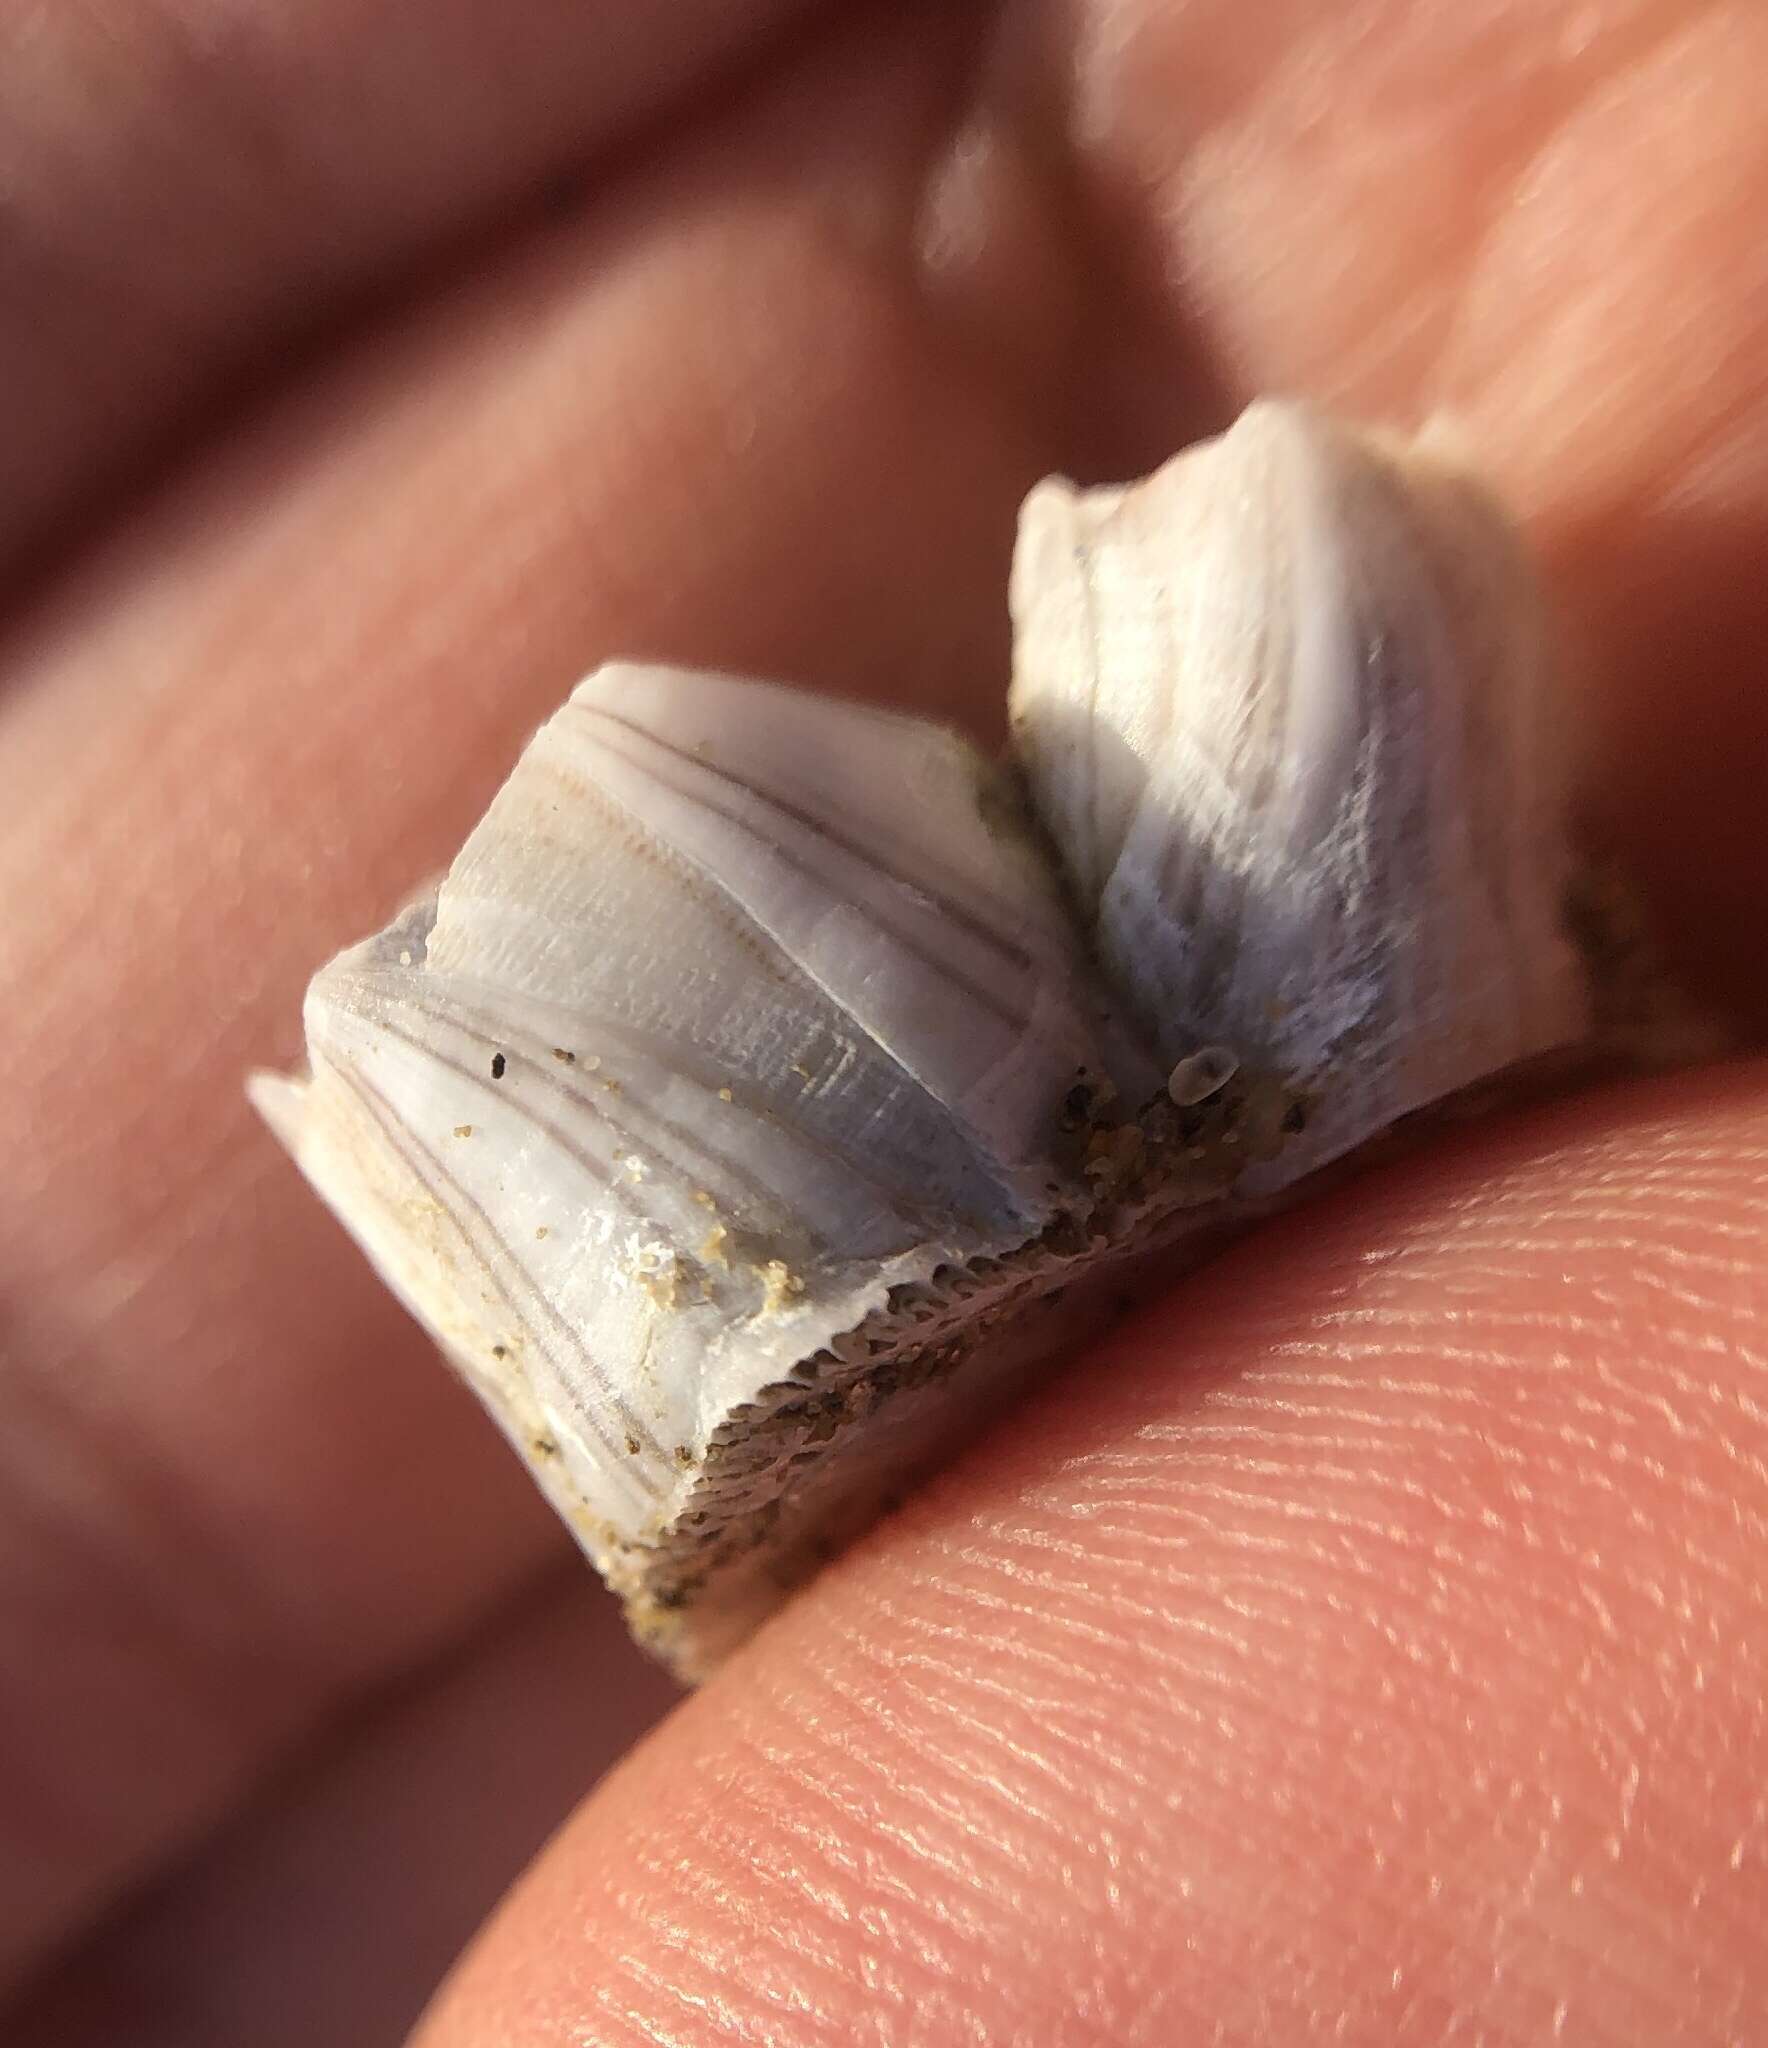 Image of Striped barnacle